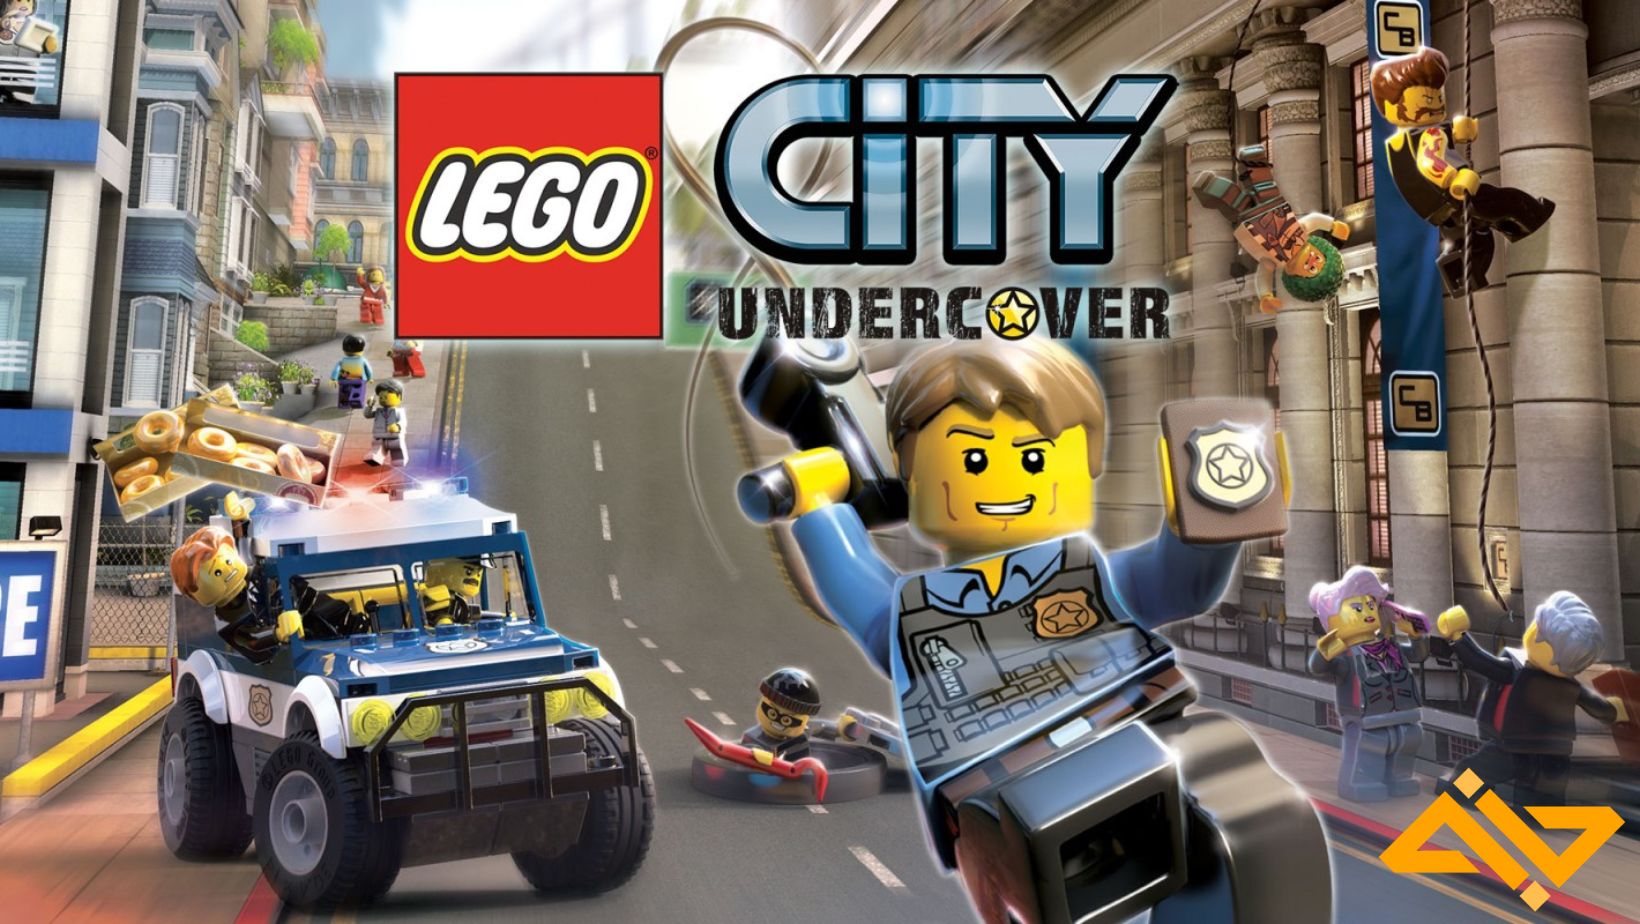 Lego City Undercover does a great job of creating an open world filled with fun activities.